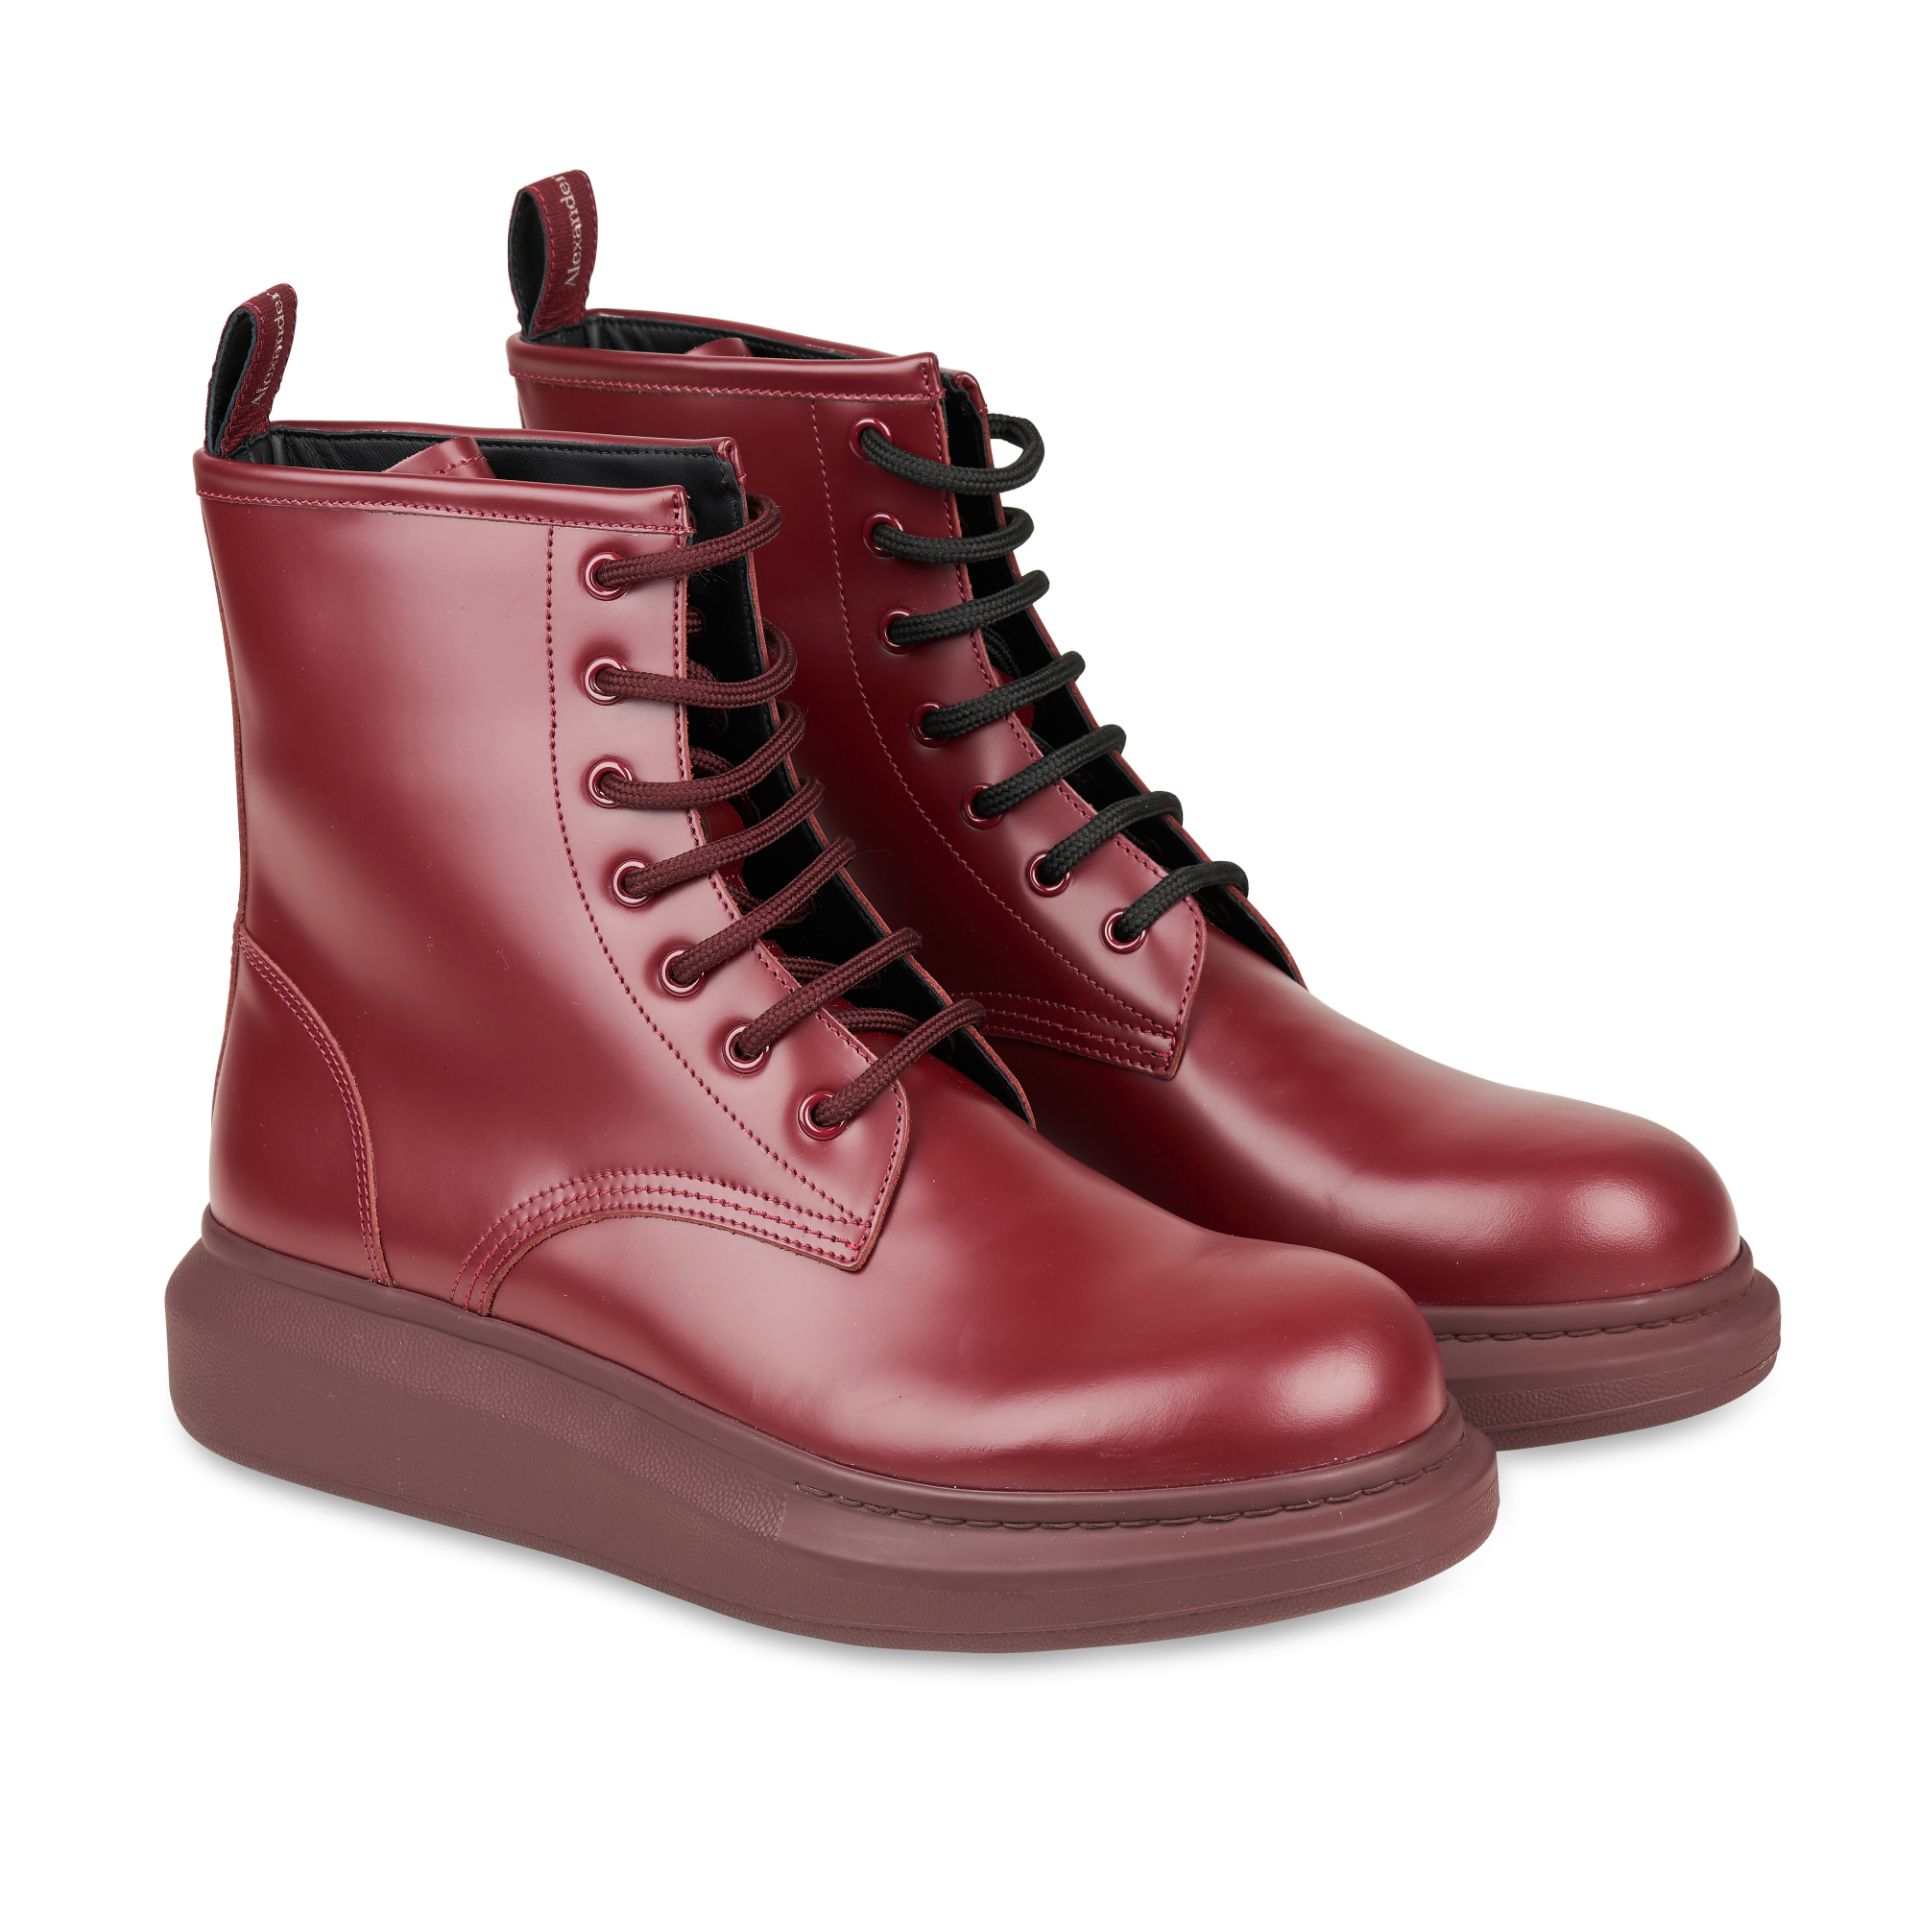 NO RESERVE ALEXANDER MCQUEEN BURGUNDY LACE-UP BOOTS